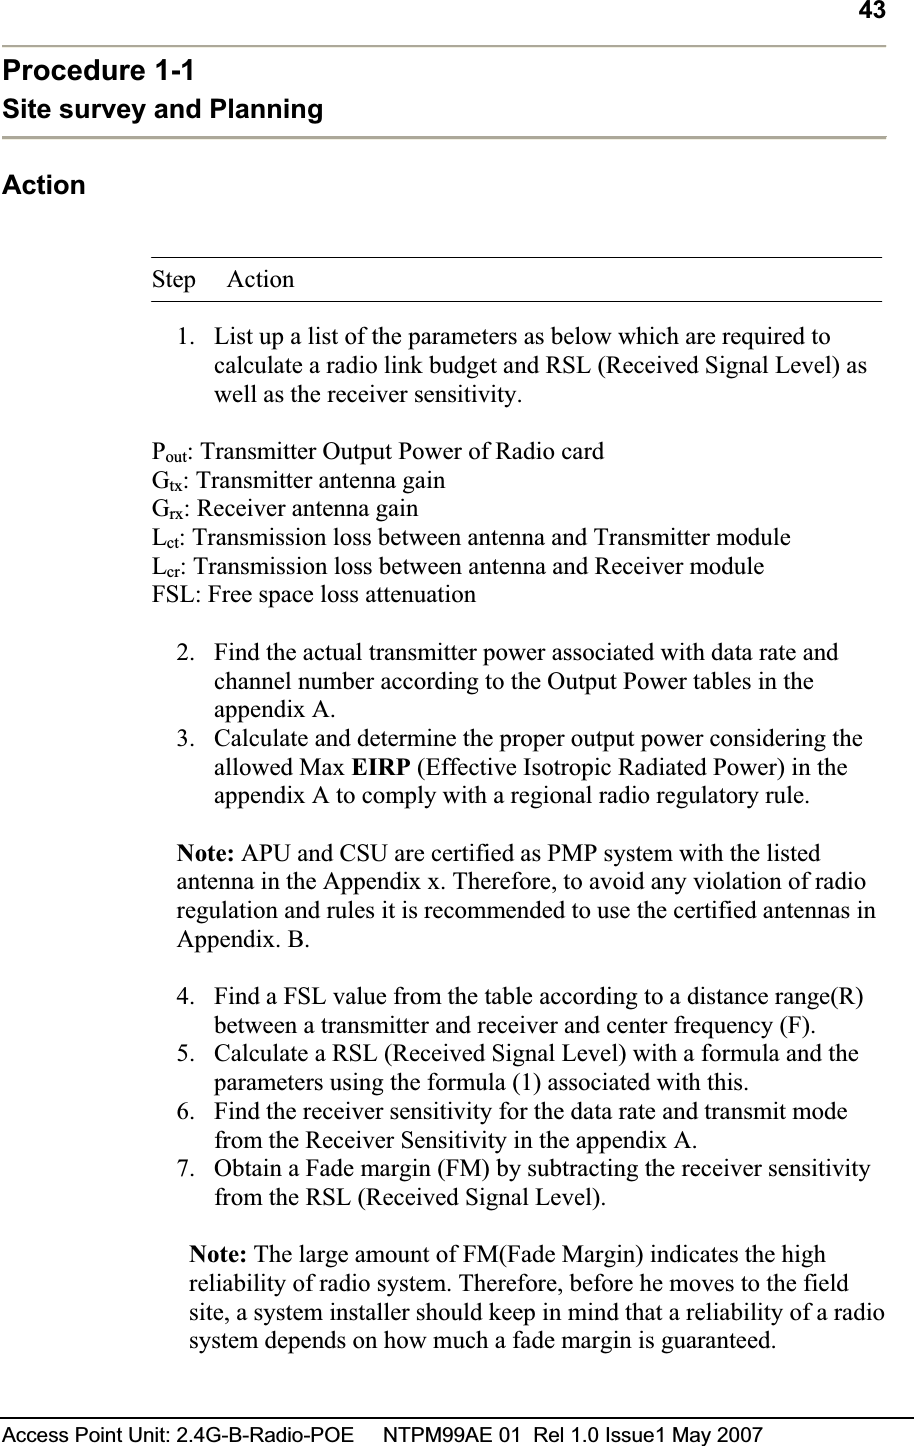 43Access Point Unit: 2.4G-B-Radio-POE     NTPM99AE 01  Rel 1.0 Issue1 May 2007 Procedure 1-1 Site survey and Planning  ActionStep Action 1. List up a list of the parameters as below which are required to calculate a radio link budget and RSL (Received Signal Level) as well as the receiver sensitivity.  Pout: Transmitter Output Power of Radio card  Gtx: Transmitter antenna gain  Grx: Receiver antenna gain  Lct: Transmission loss between antenna and Transmitter module Lcr: Transmission loss between antenna and Receiver module  FSL: Free space loss attenuation 2. Find the actual transmitter power associated with data rate and channel number according to the Output Power tables in the appendix A.3. Calculate and determine the proper output power considering the allowed Max EIRP (Effective Isotropic Radiated Power) in the appendix A to comply with a regional radio regulatory rule.Note: APU and CSU are certified as PMP system with the listed antenna in the Appendix x. Therefore, to avoid any violation of radio regulation and rules it is recommended to use the certified antennas in Appendix. B. 4. Find a FSL value from the table according to a distance range(R) between a transmitter and receiver and center frequency (F).  5. Calculate a RSL (Received Signal Level) with a formula and the parameters using the formula (1) associated with this.  6. Find the receiver sensitivity for the data rate and transmit mode from the Receiver Sensitivity in the appendix A.  7. Obtain a Fade margin (FM) by subtracting the receiver sensitivity from the RSL (Received Signal Level).  Note: The large amount of FM(Fade Margin) indicates the high reliability of radio system. Therefore, before he moves to the field site, a system installer should keep in mind that a reliability of a radio system depends on how much a fade margin is guaranteed.  